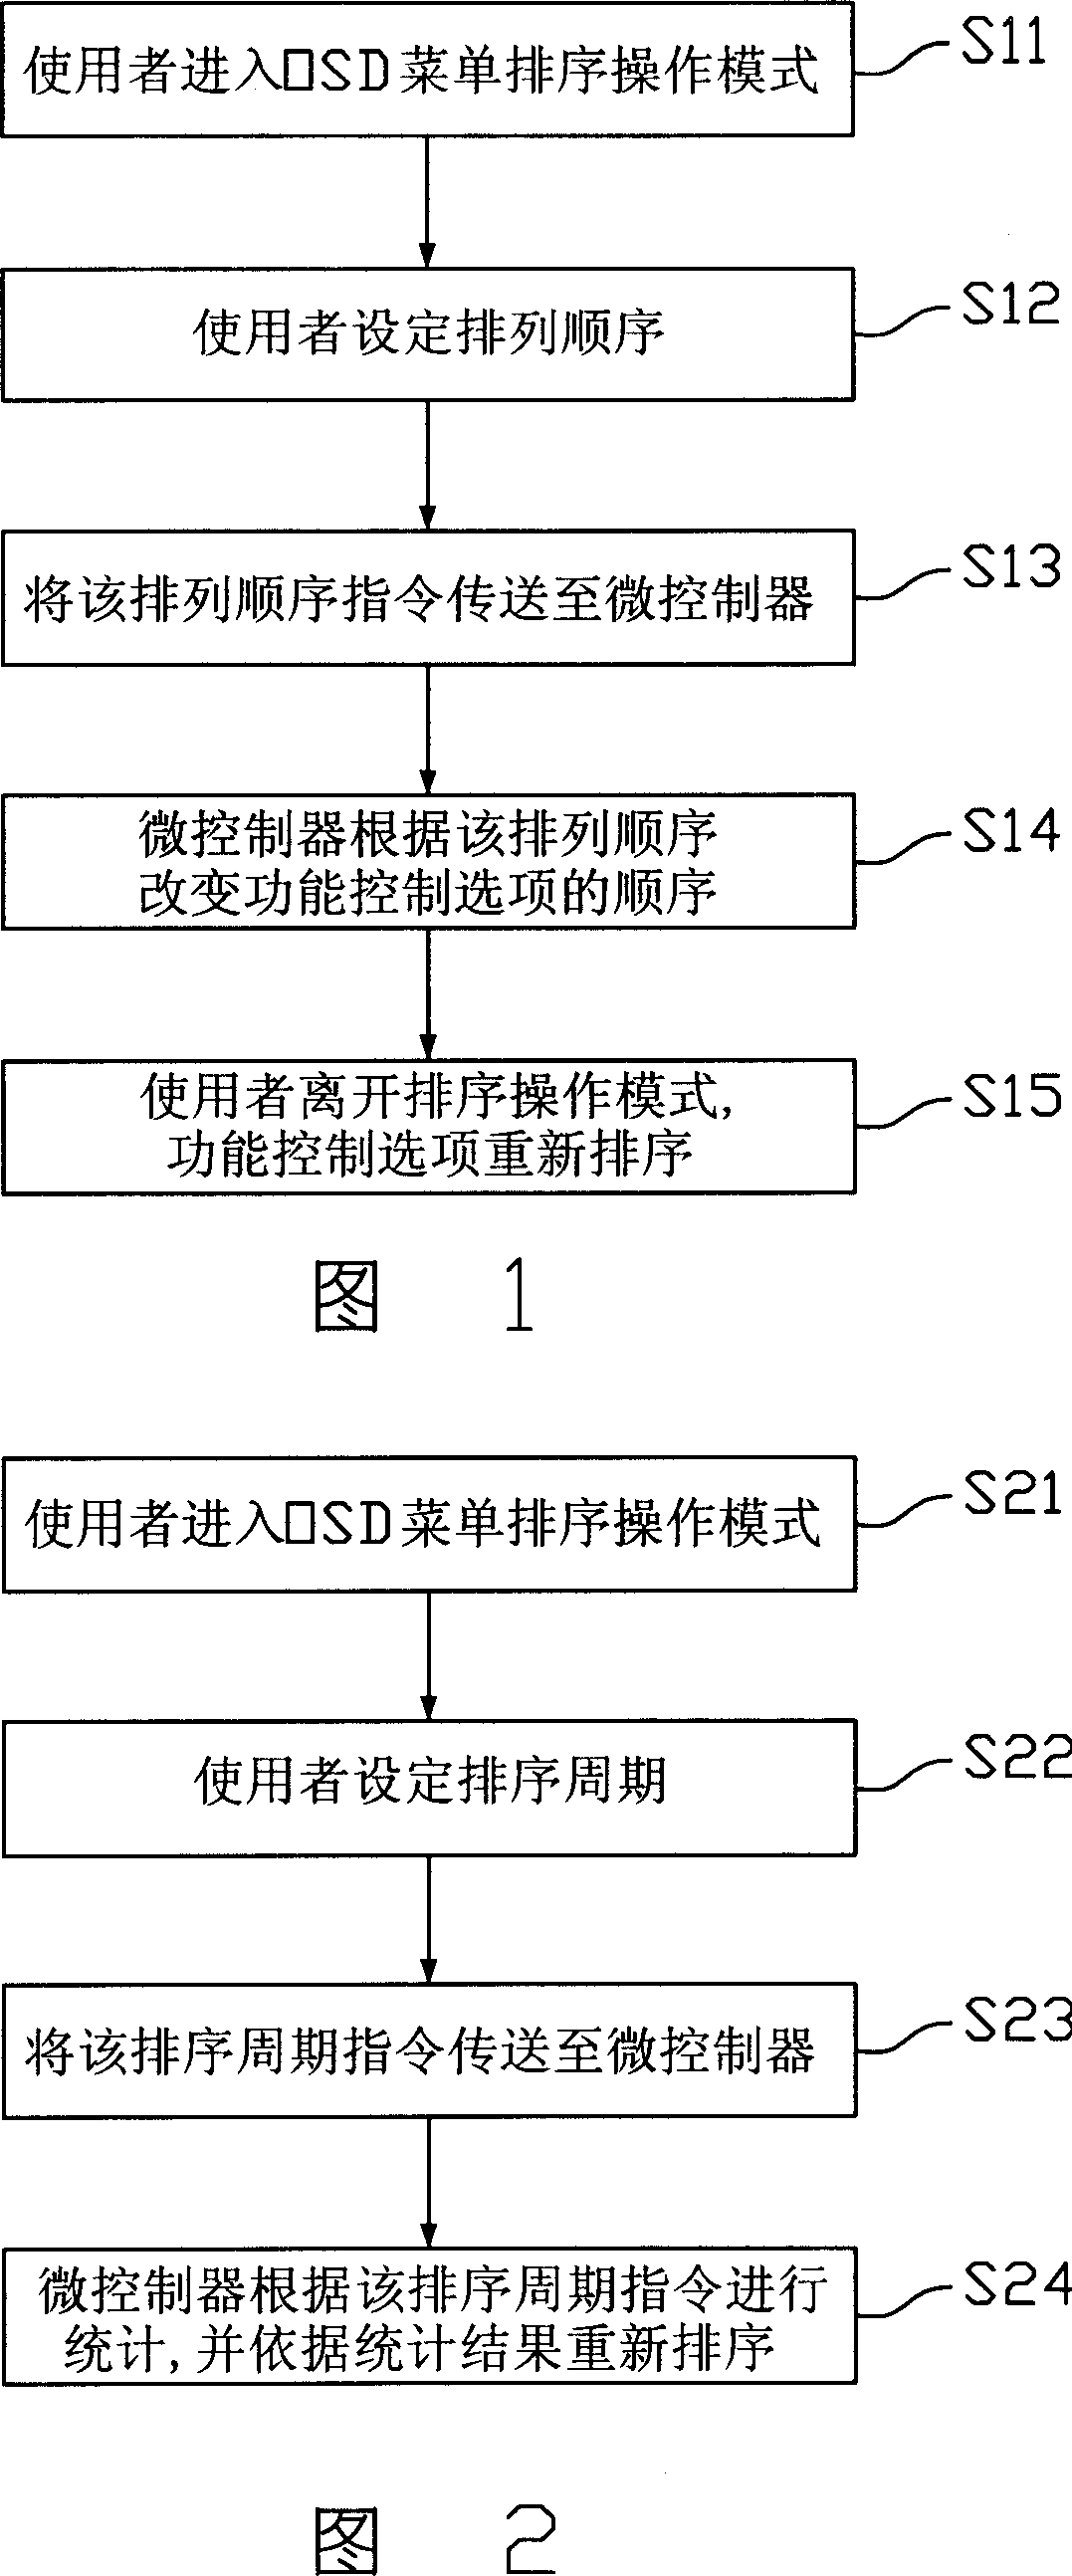 Control method for screen display